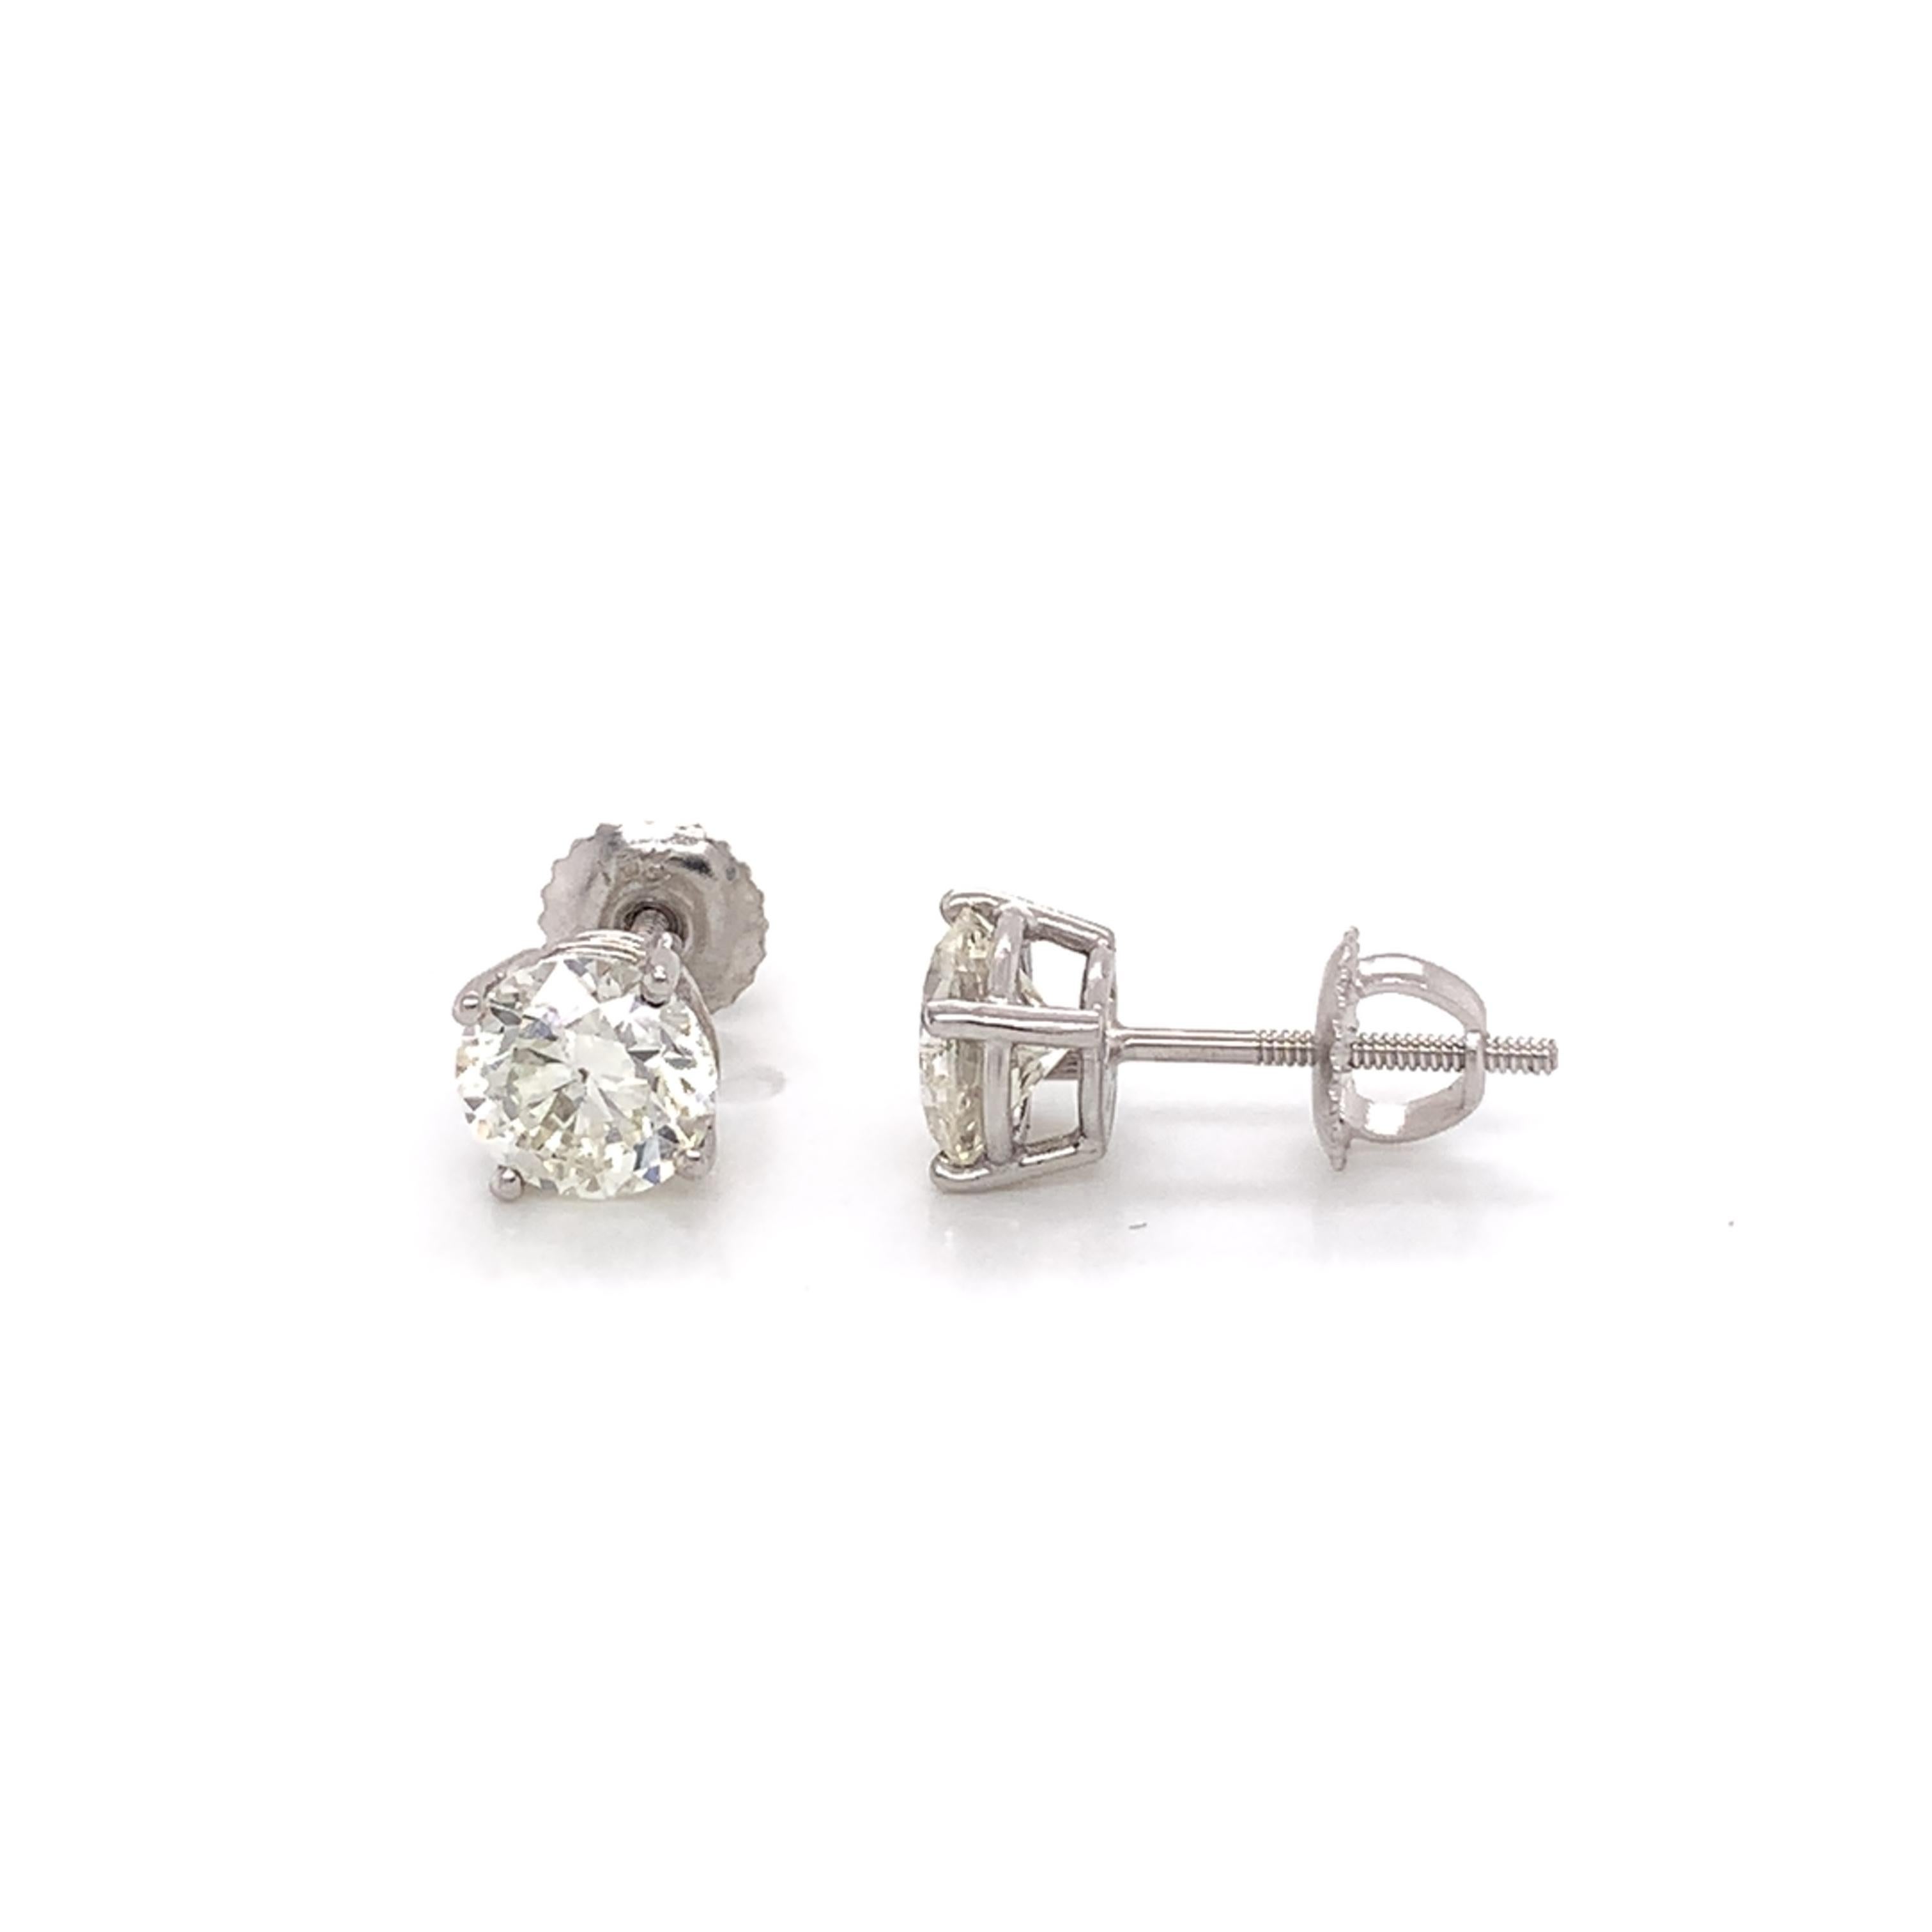 EGL Certified diamond stud earrings made with real/natural brilliant cut diamonds. Total Diamond Weight: 2.18 carats. Diamond Quantity: 2 round diamonds. Color: G-H. Clarity: SI2-SI3. Mounted on 18 karat white gold screw back setting.